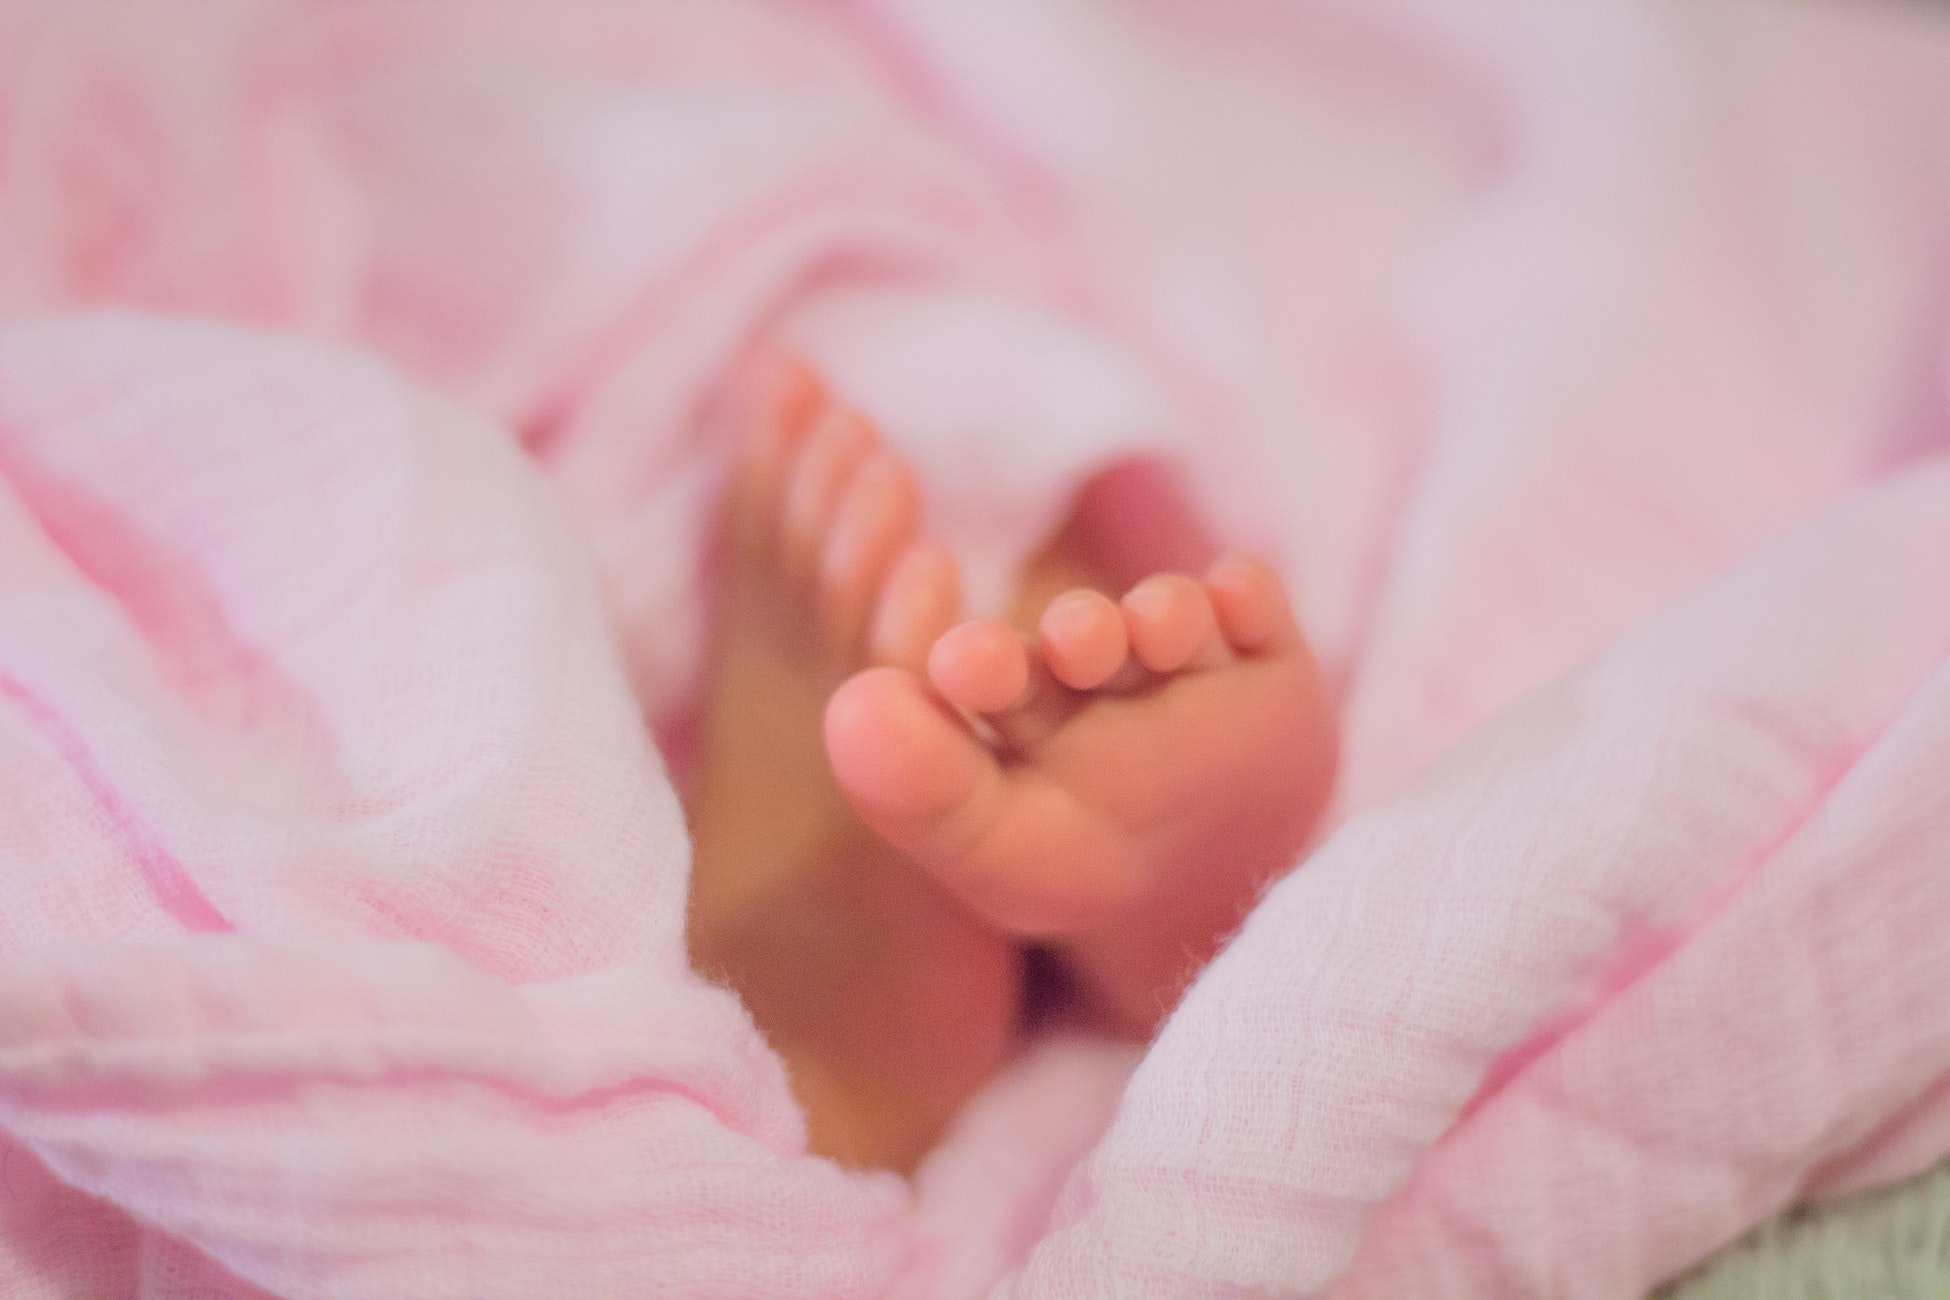 Picture of baby feet on pink blanket.